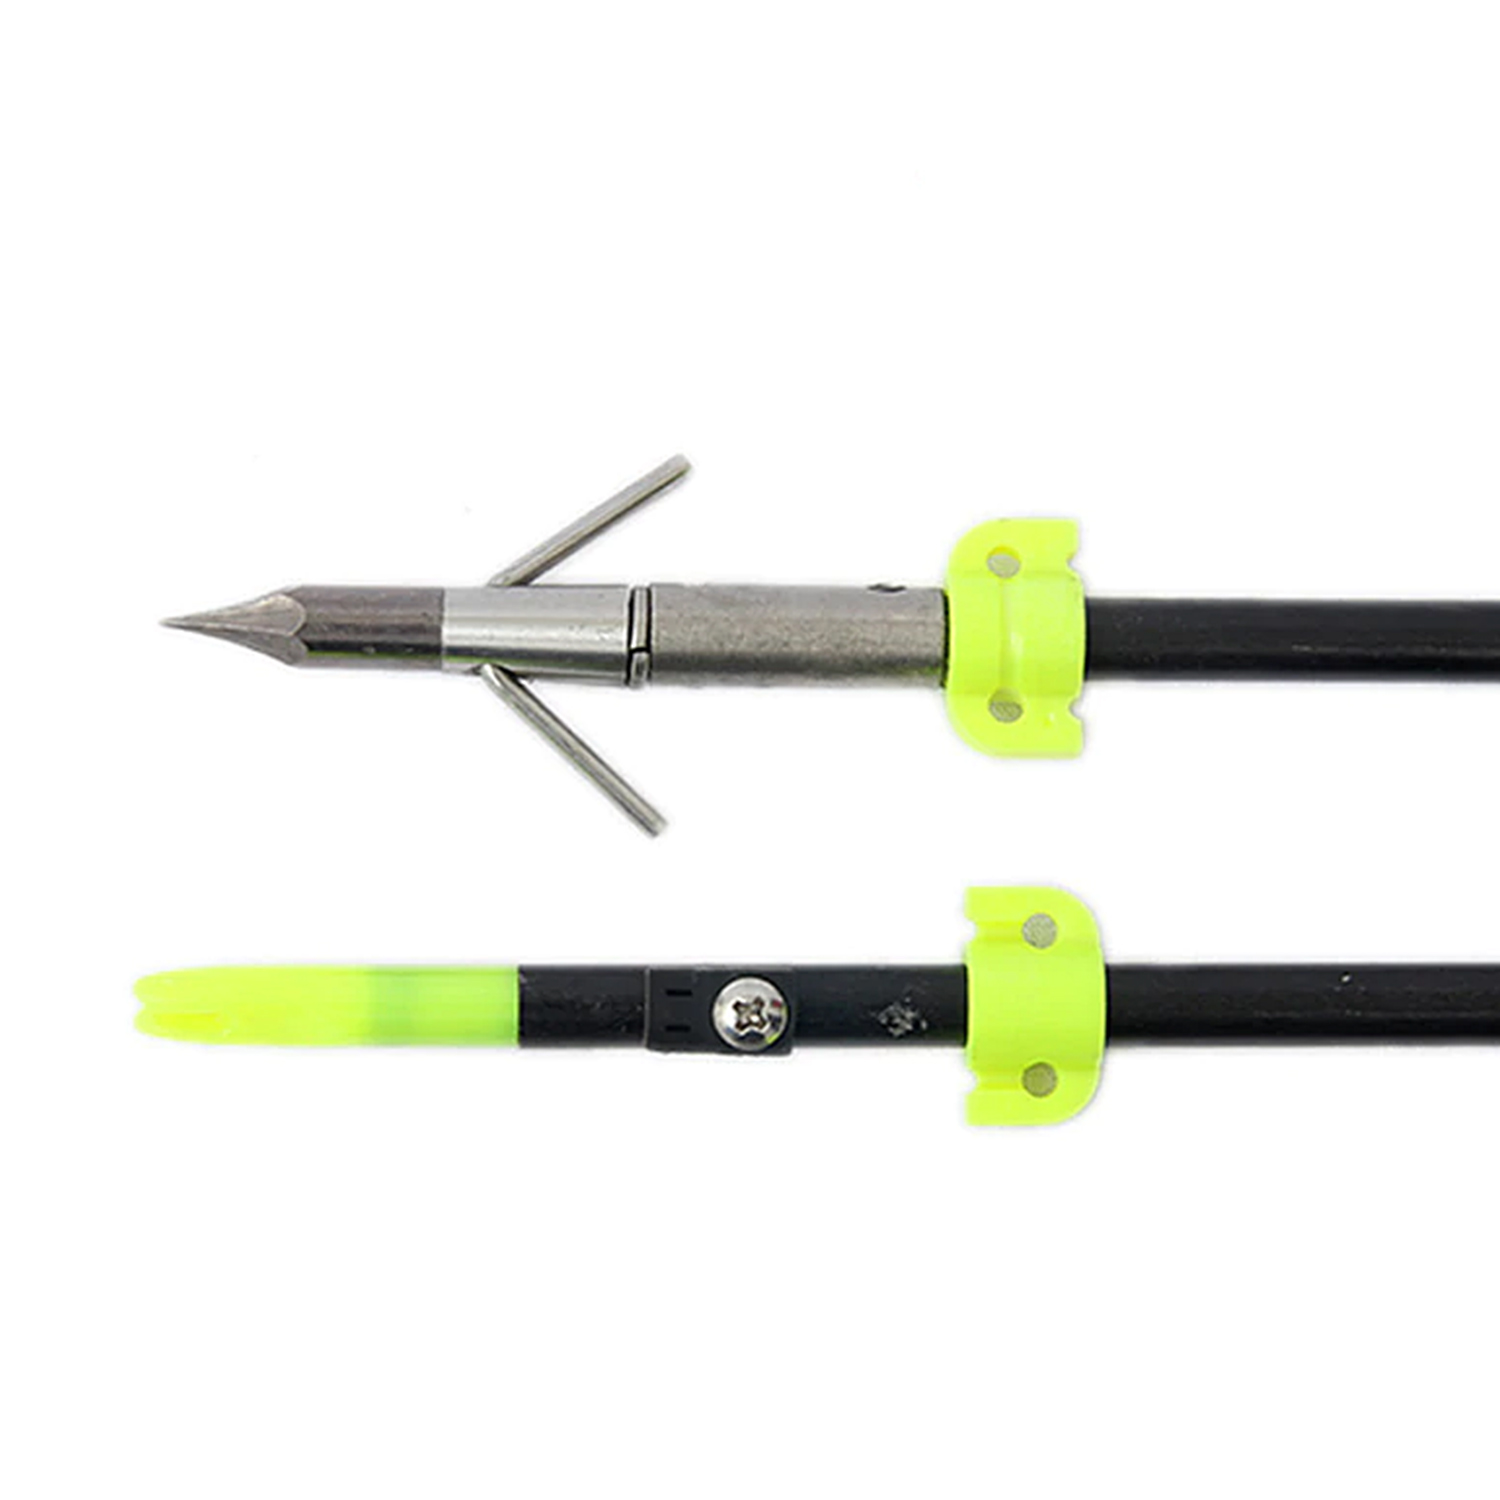 1 pcs 8mm Spine 300 Fishing Arrow Fiberglass Fish Arrow with Broadheads for Compound/Recurve Bow